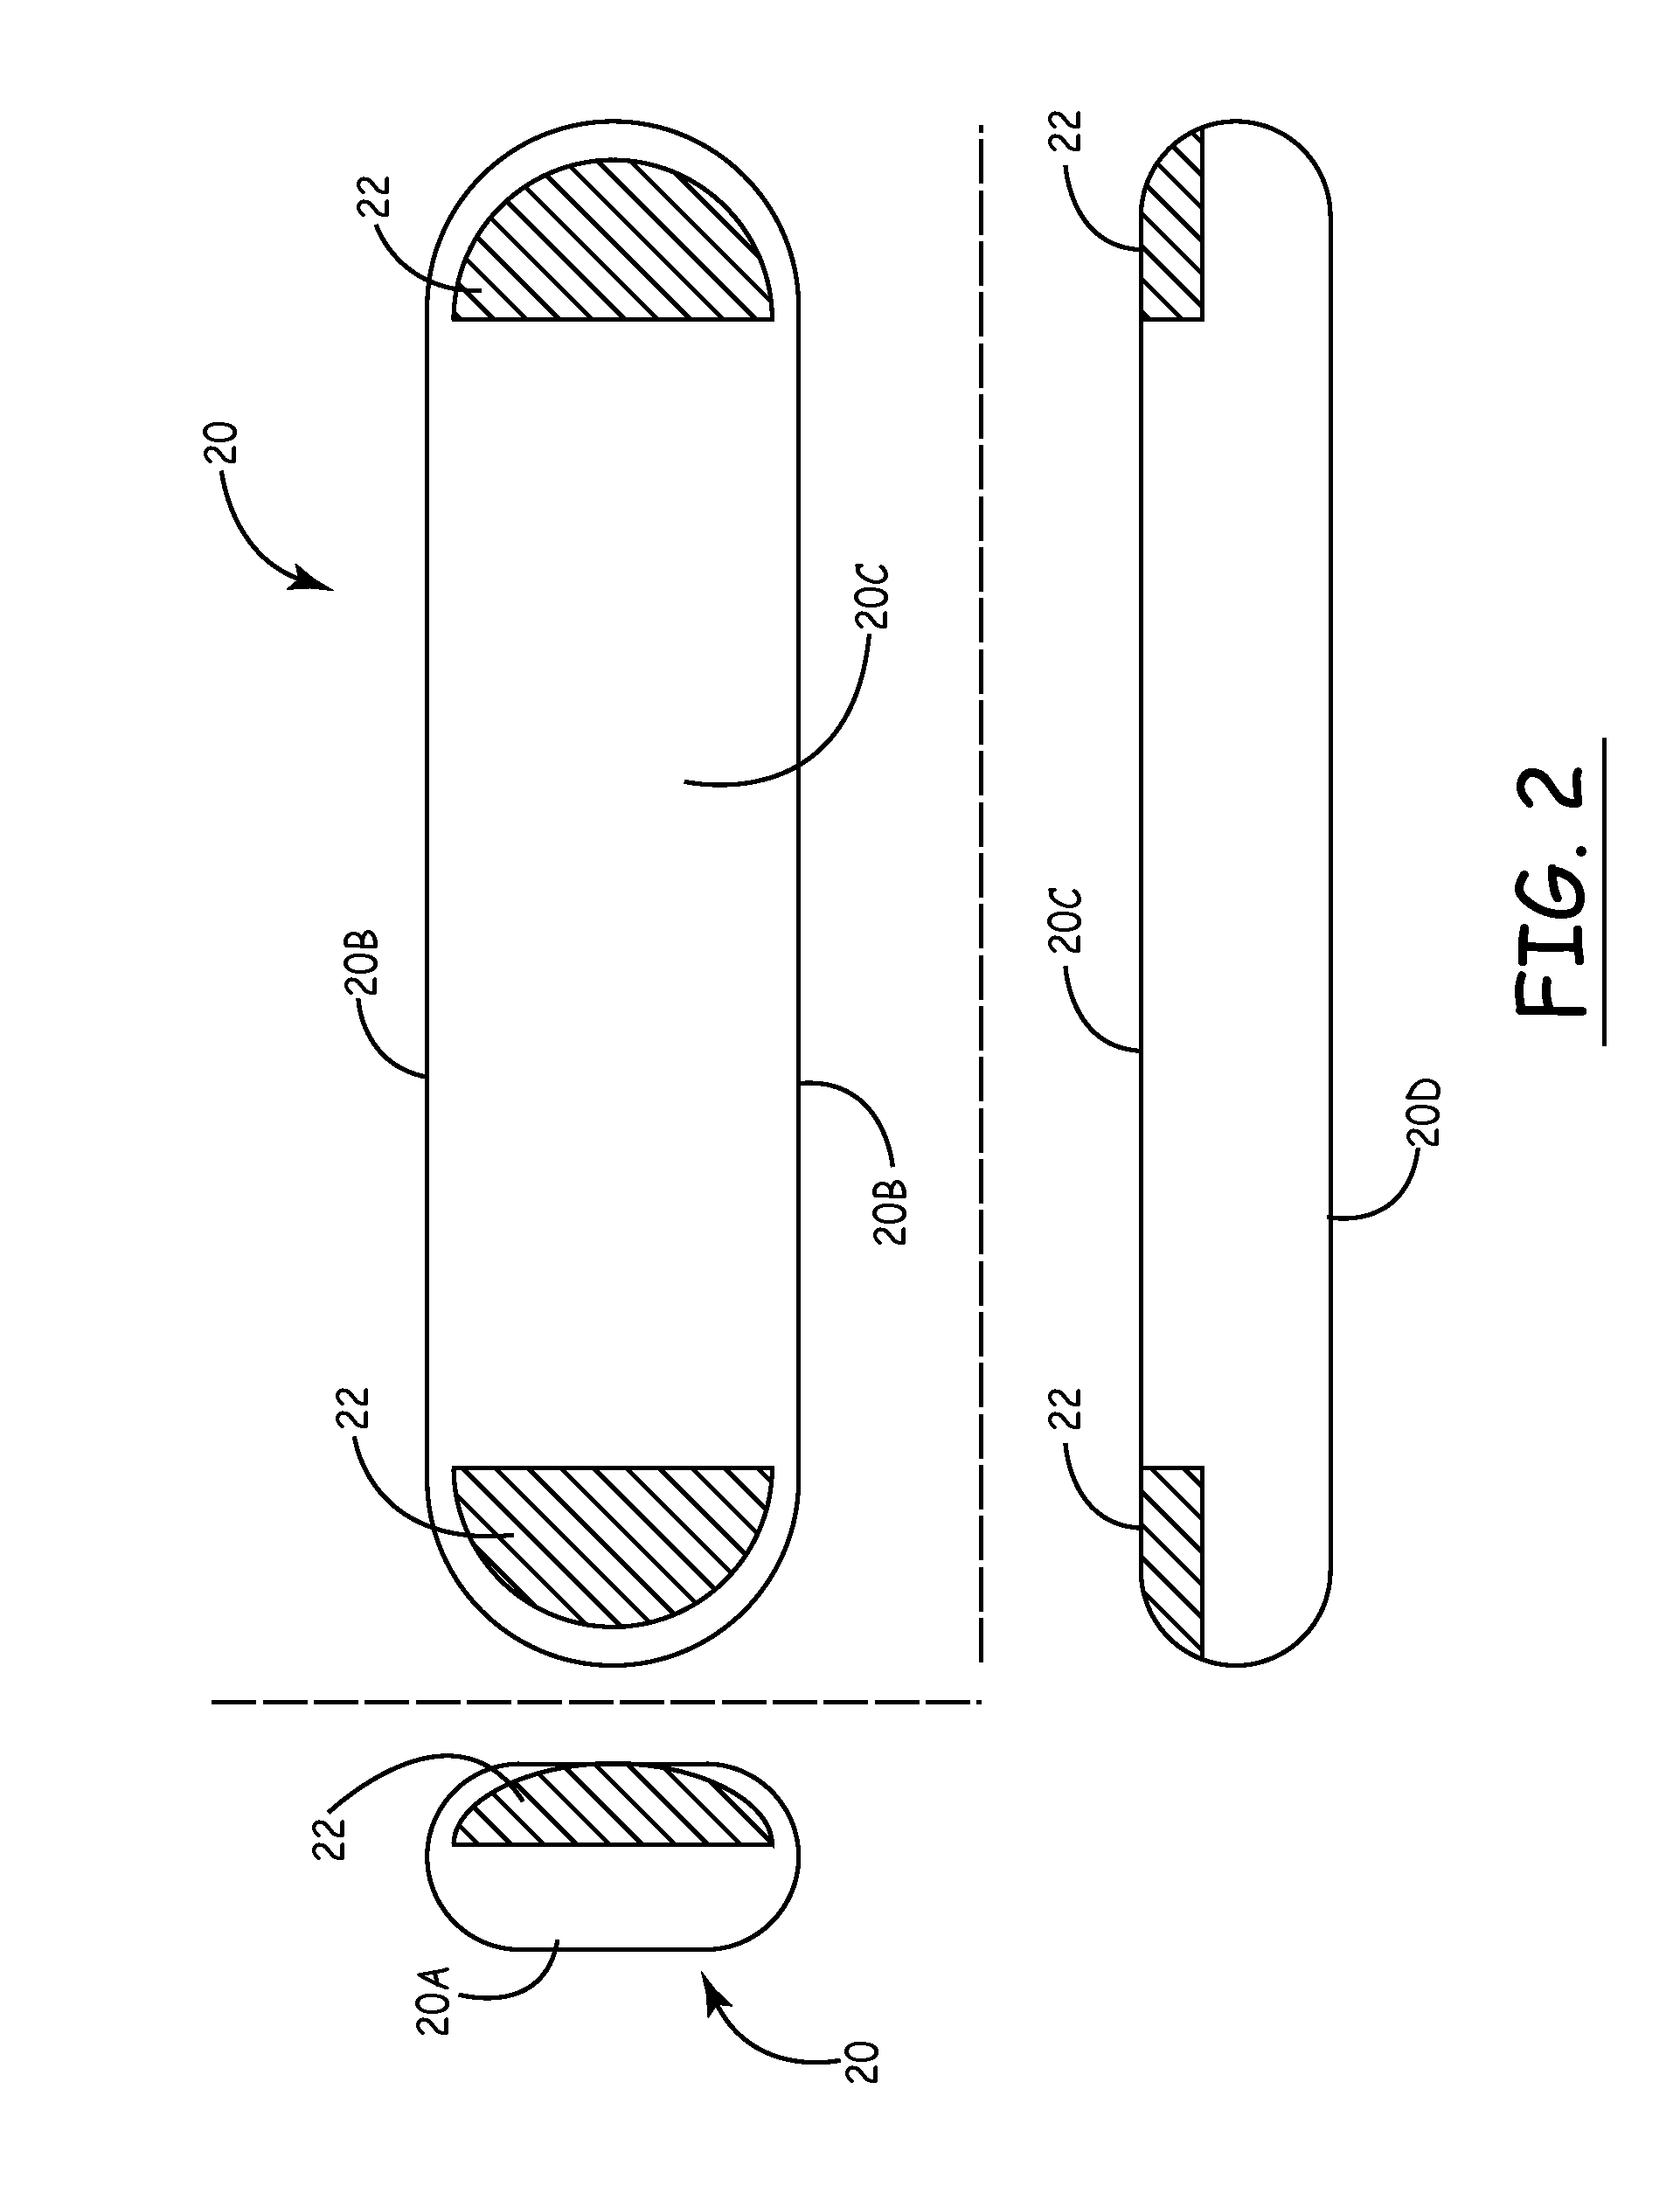 Electrode shapes and positions for reducing loss of contact in an implantable ECG recorder